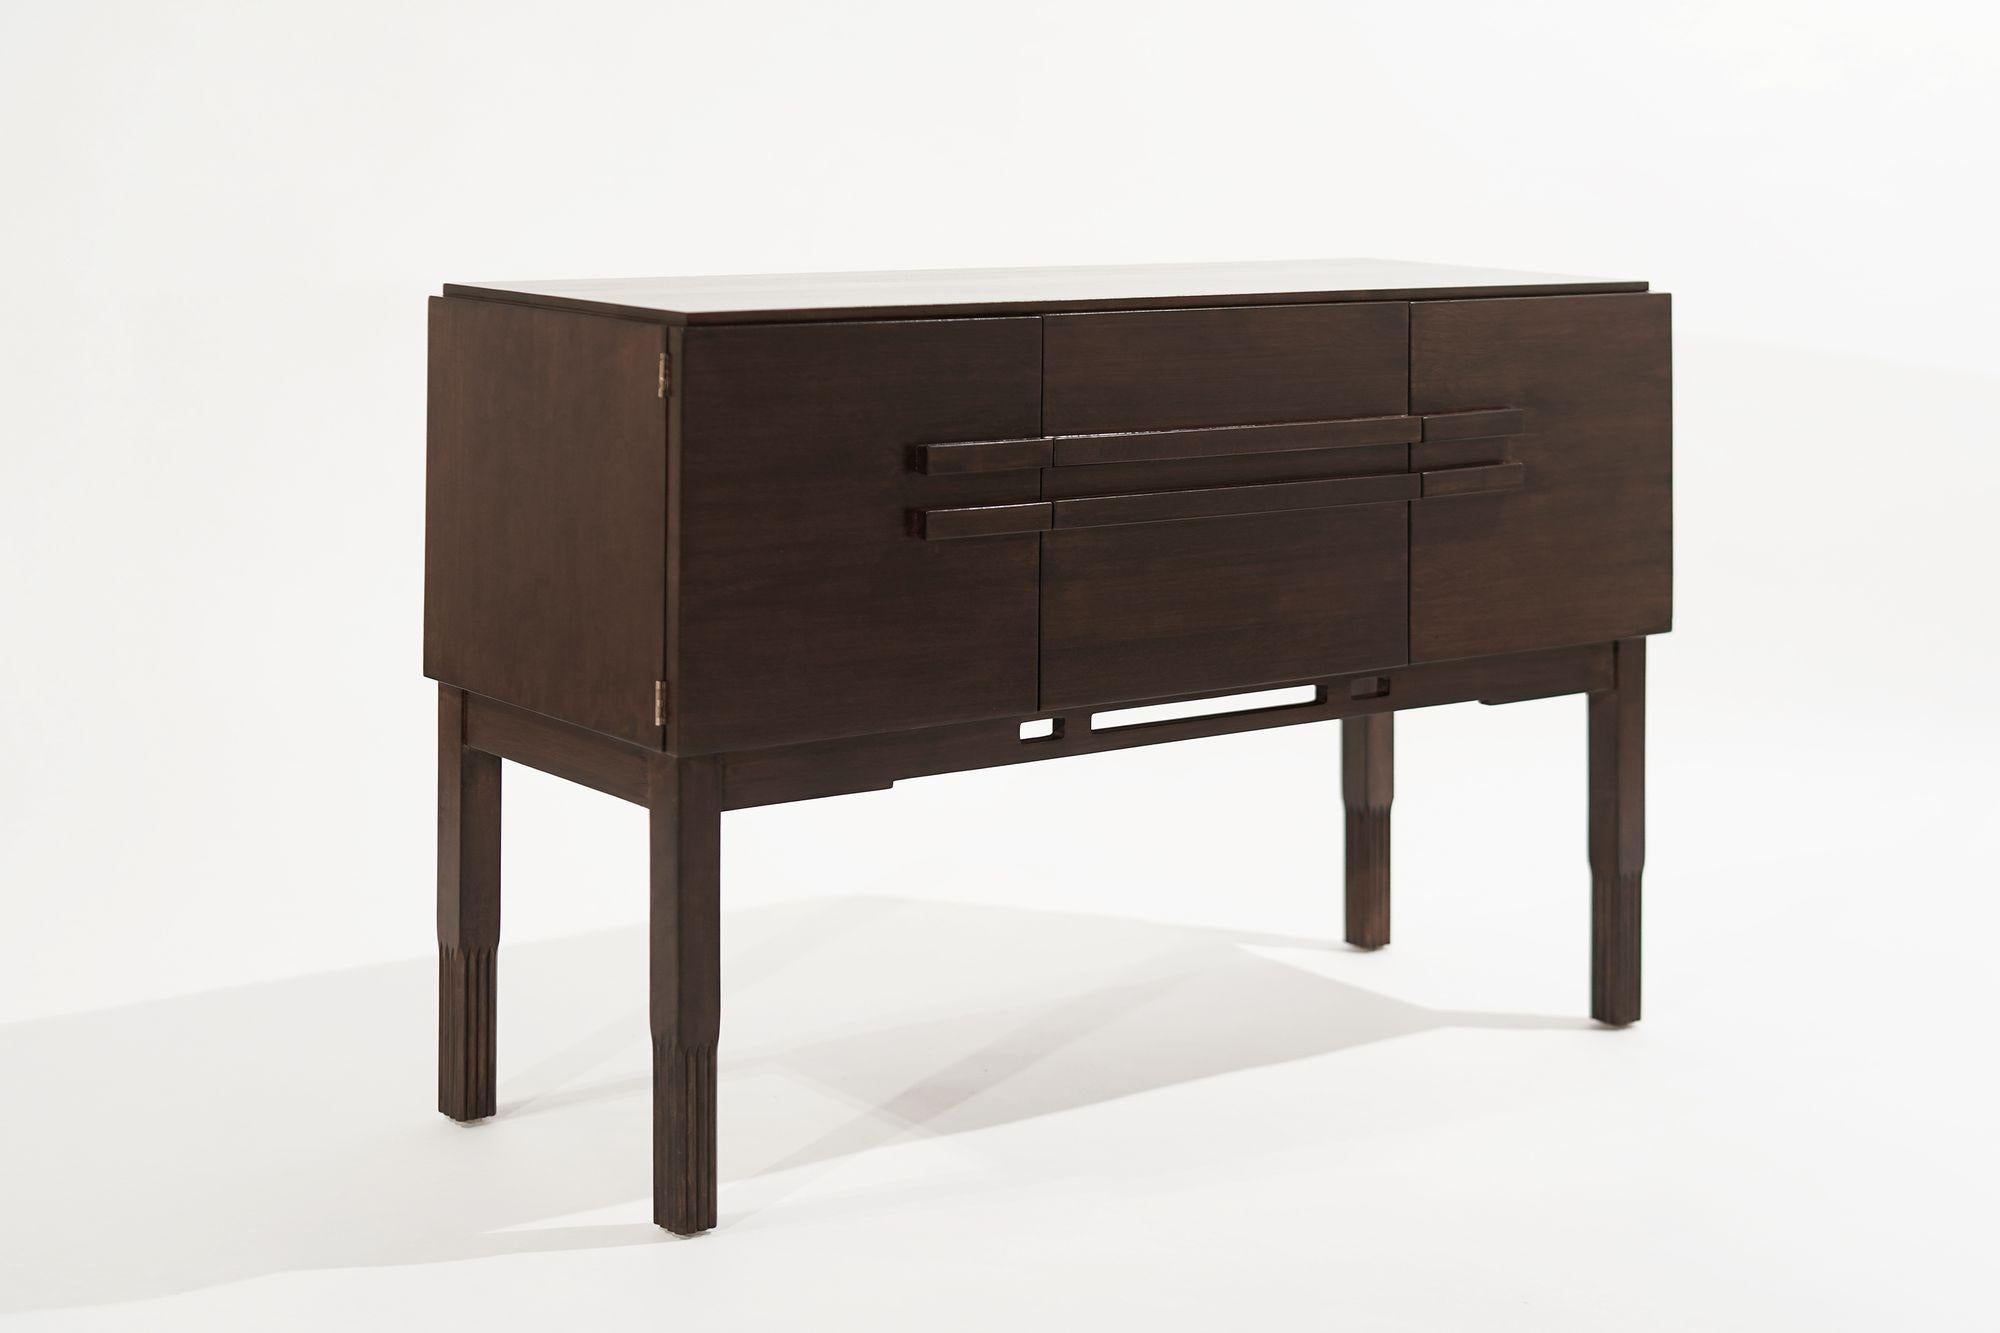 A console table executed in walnut by John Stuart, circa 1950-1959. Completely restored, featuring two drawers and side doors that open up to reveal shelving.
 
Other designers from this period include Paul McCobb, Vladimir Kagan, Hans Wegner, Gio